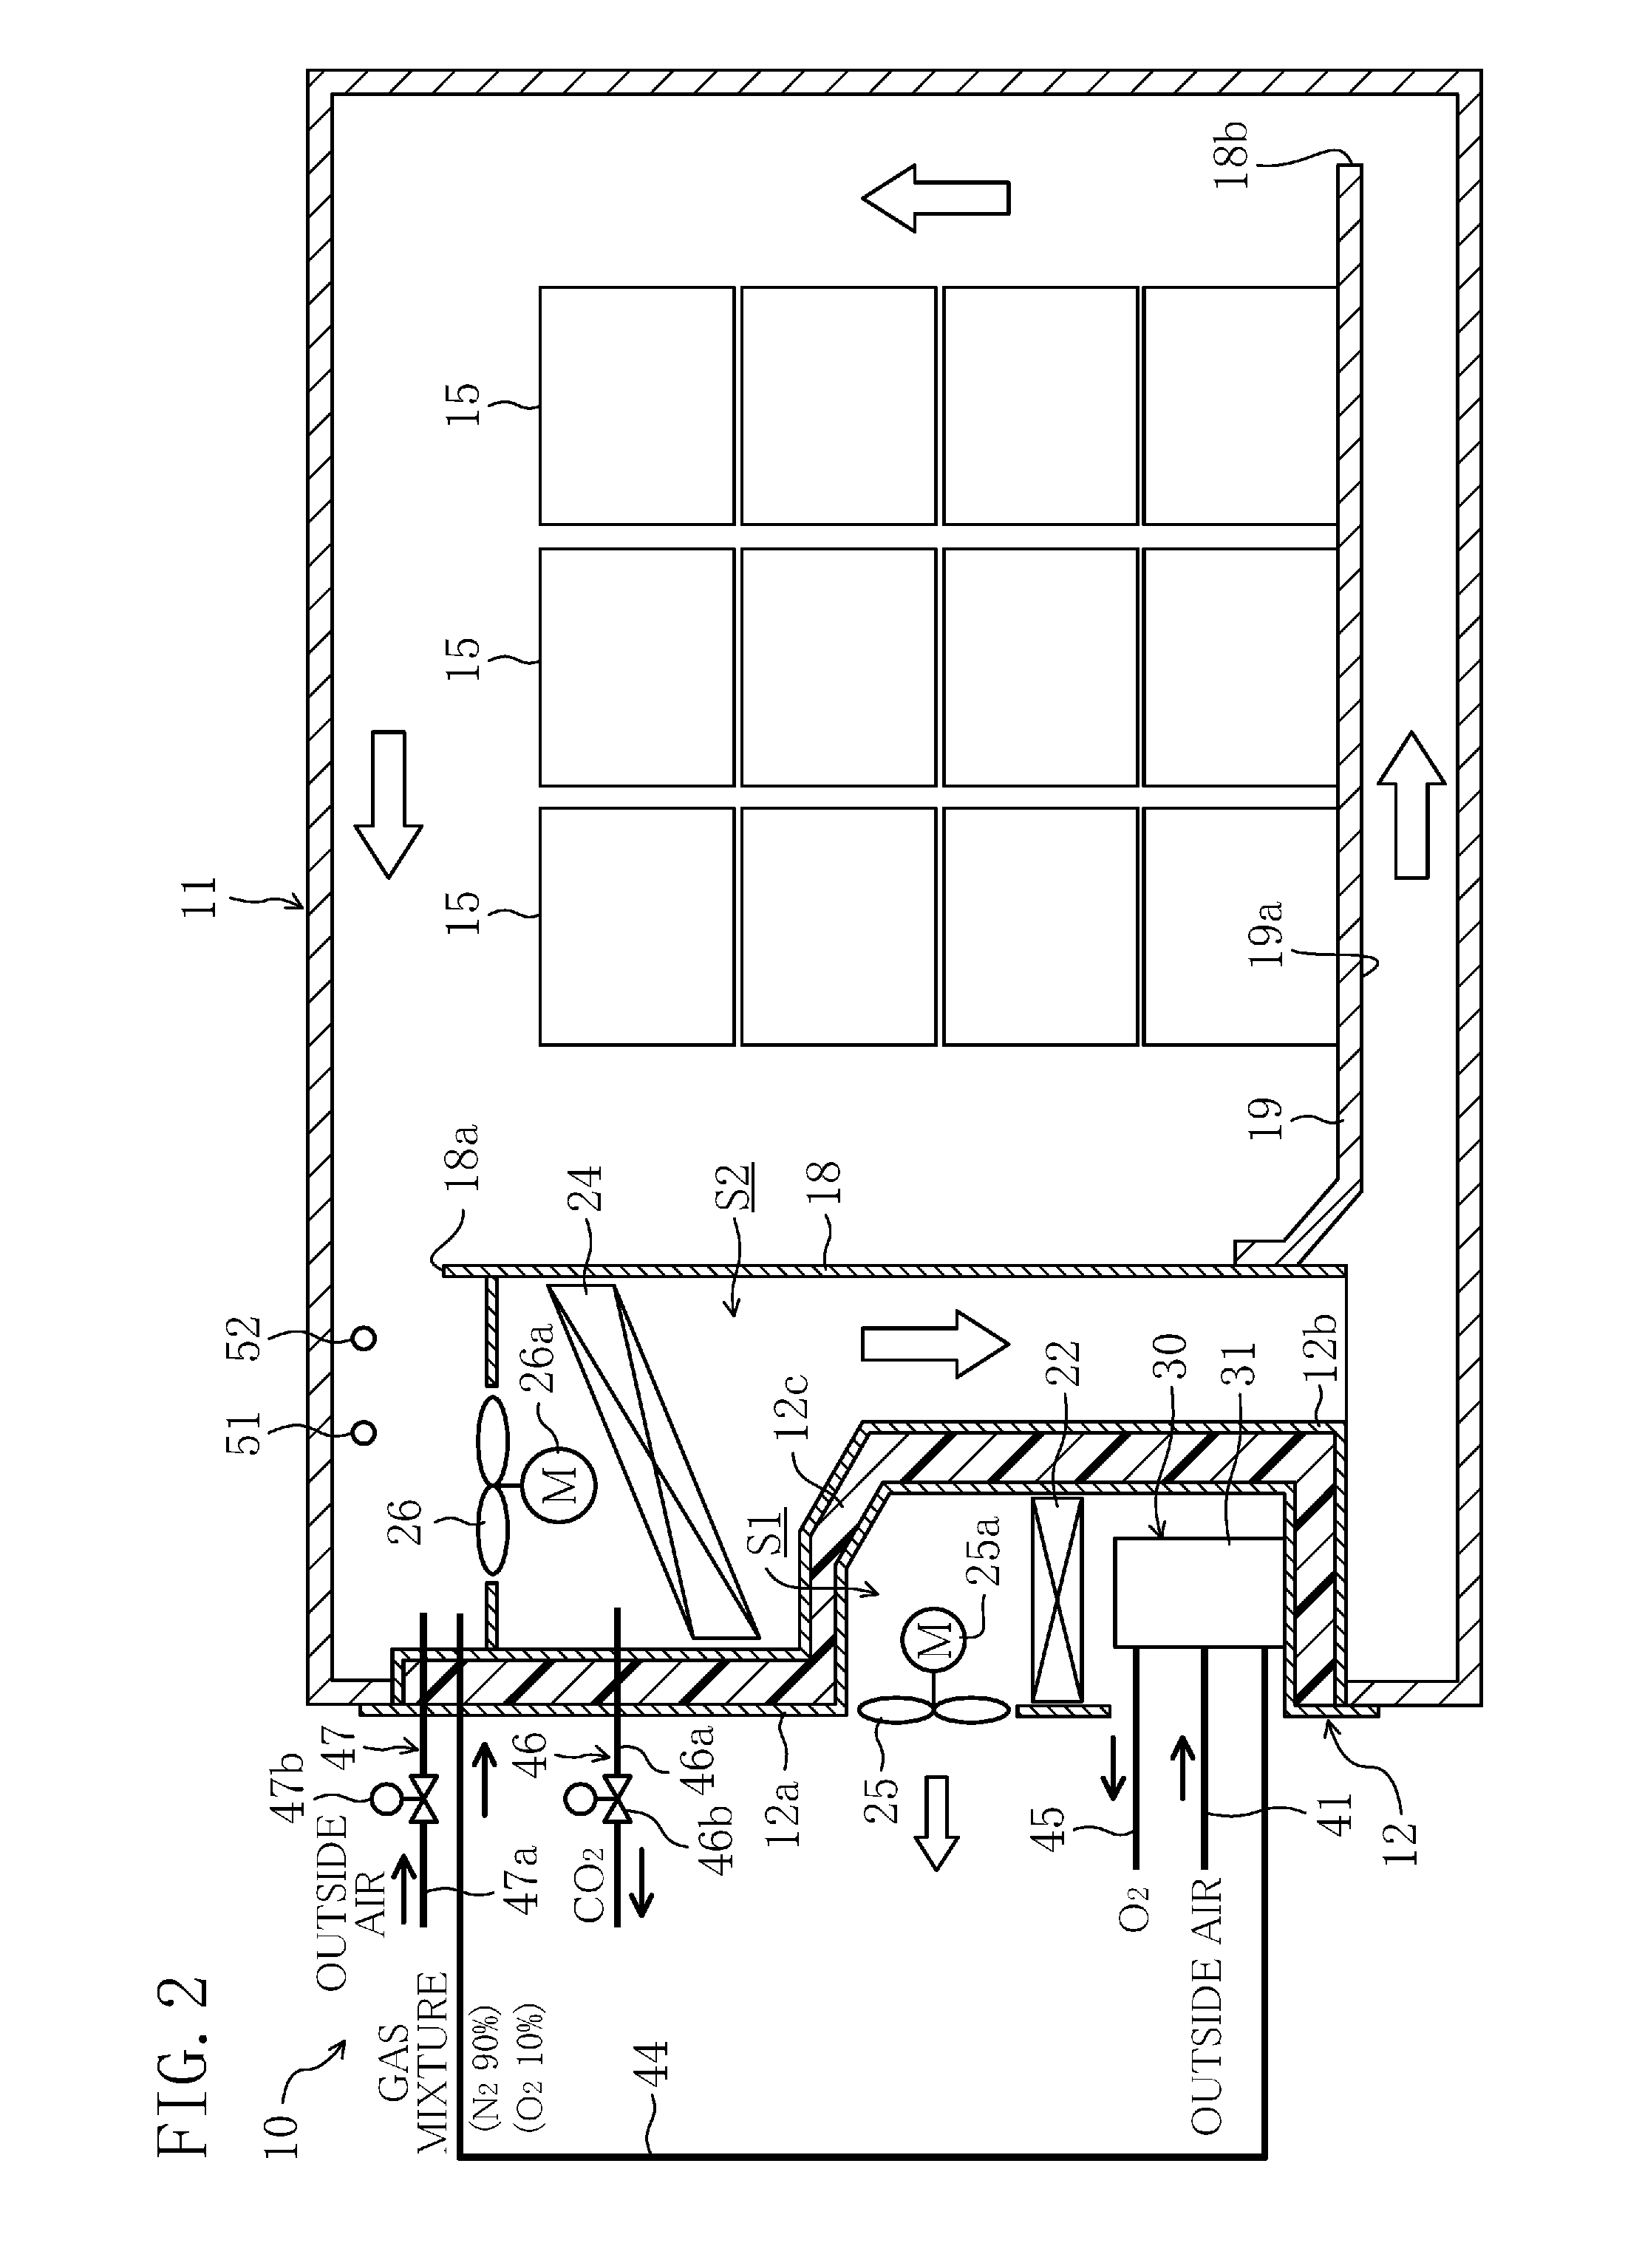 Refrigeration unit for container